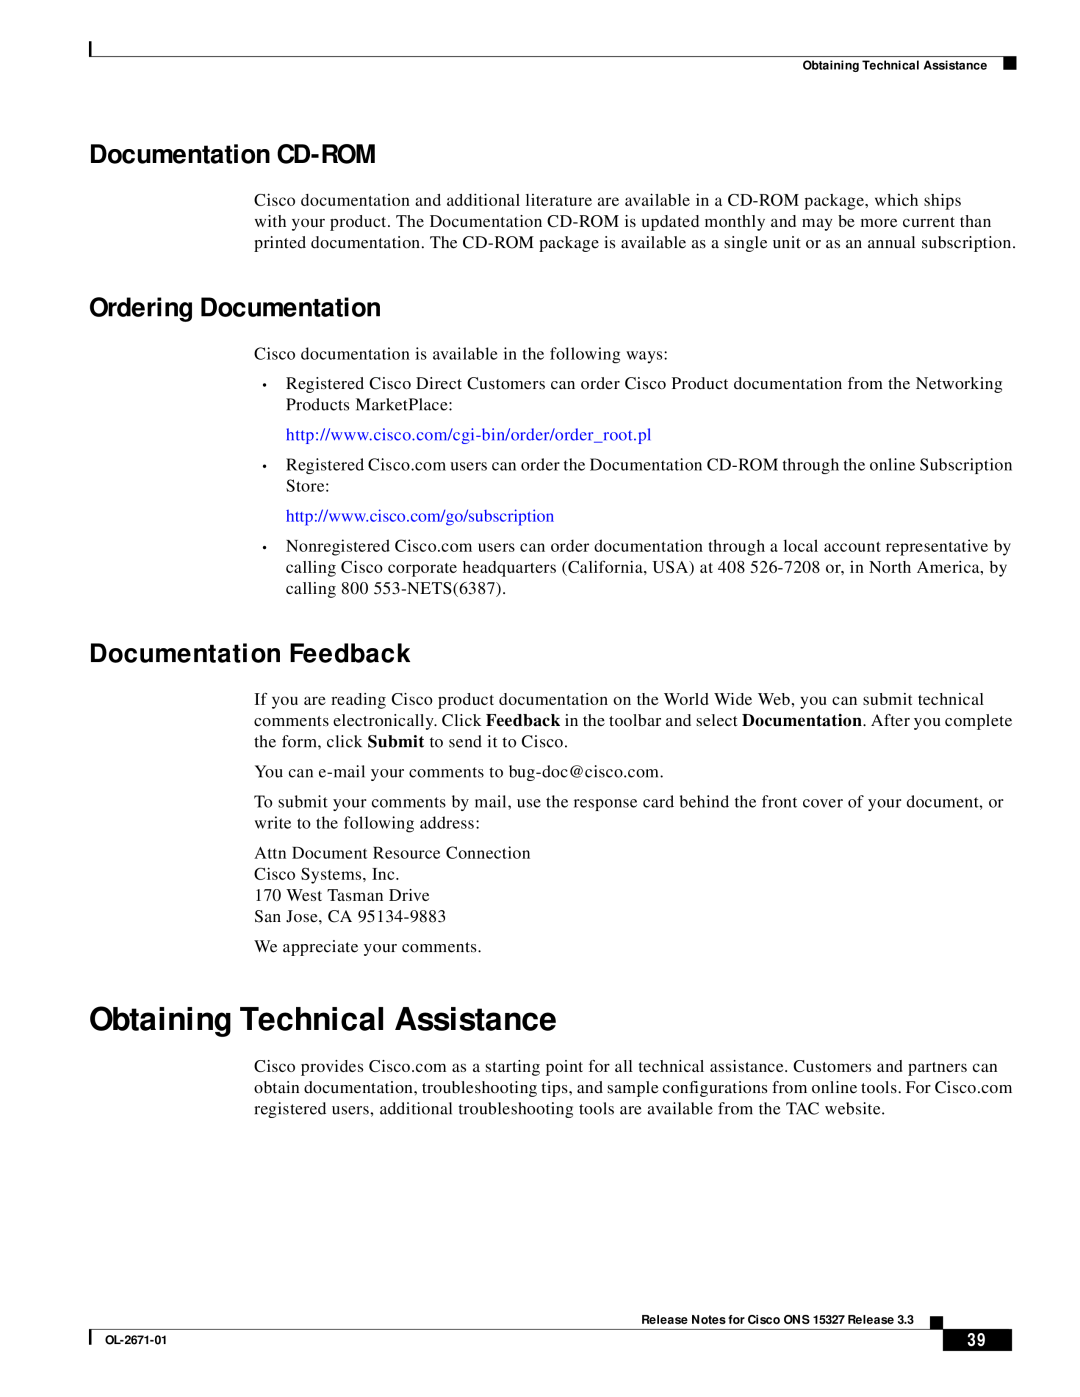 Cisco Systems ONS 15327 manual Obtaining Technical Assistance, Documentation CD-ROM, Ordering Documentation 